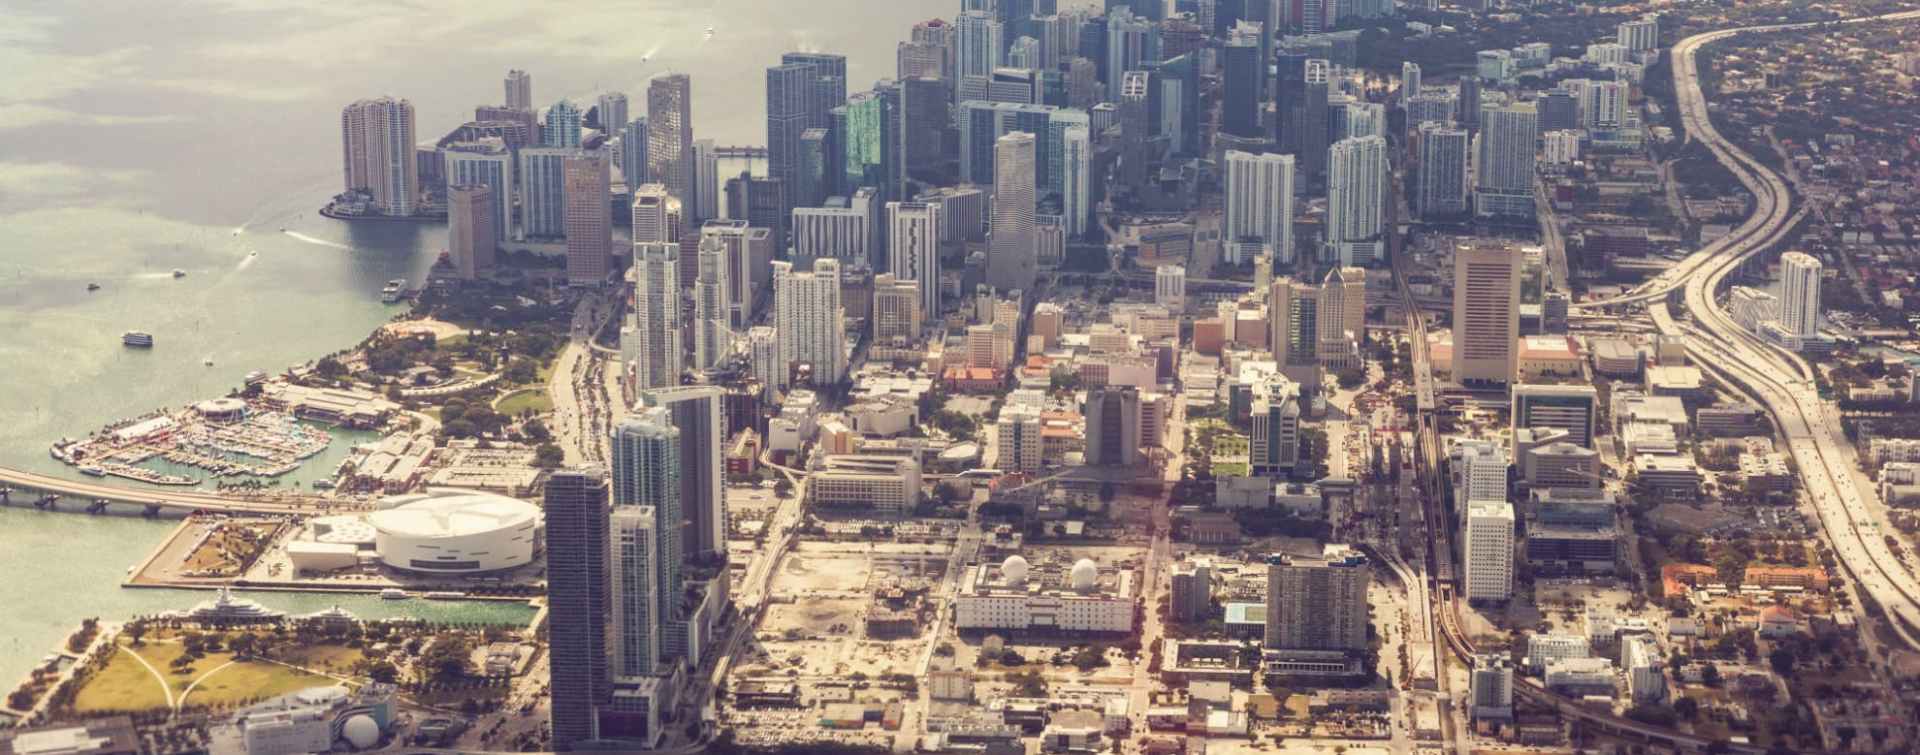 aerial view of skyscrapers in Miami Wynwood District